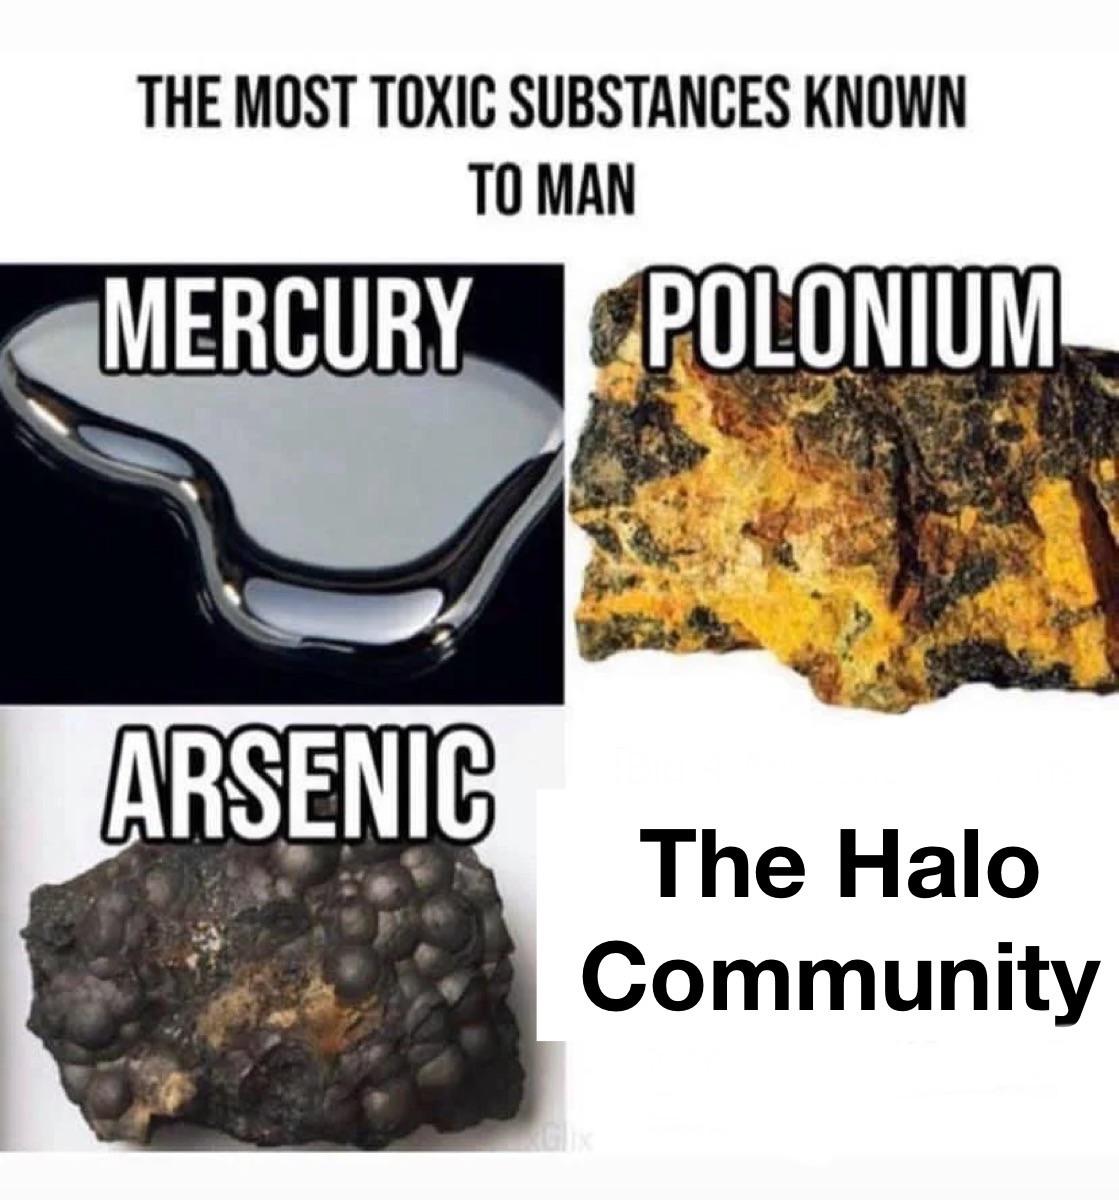 funny memes  - most toxic substances meme - The Most Toxic Substances Known To Man Mercury Polonium Arsenic The Halo Community